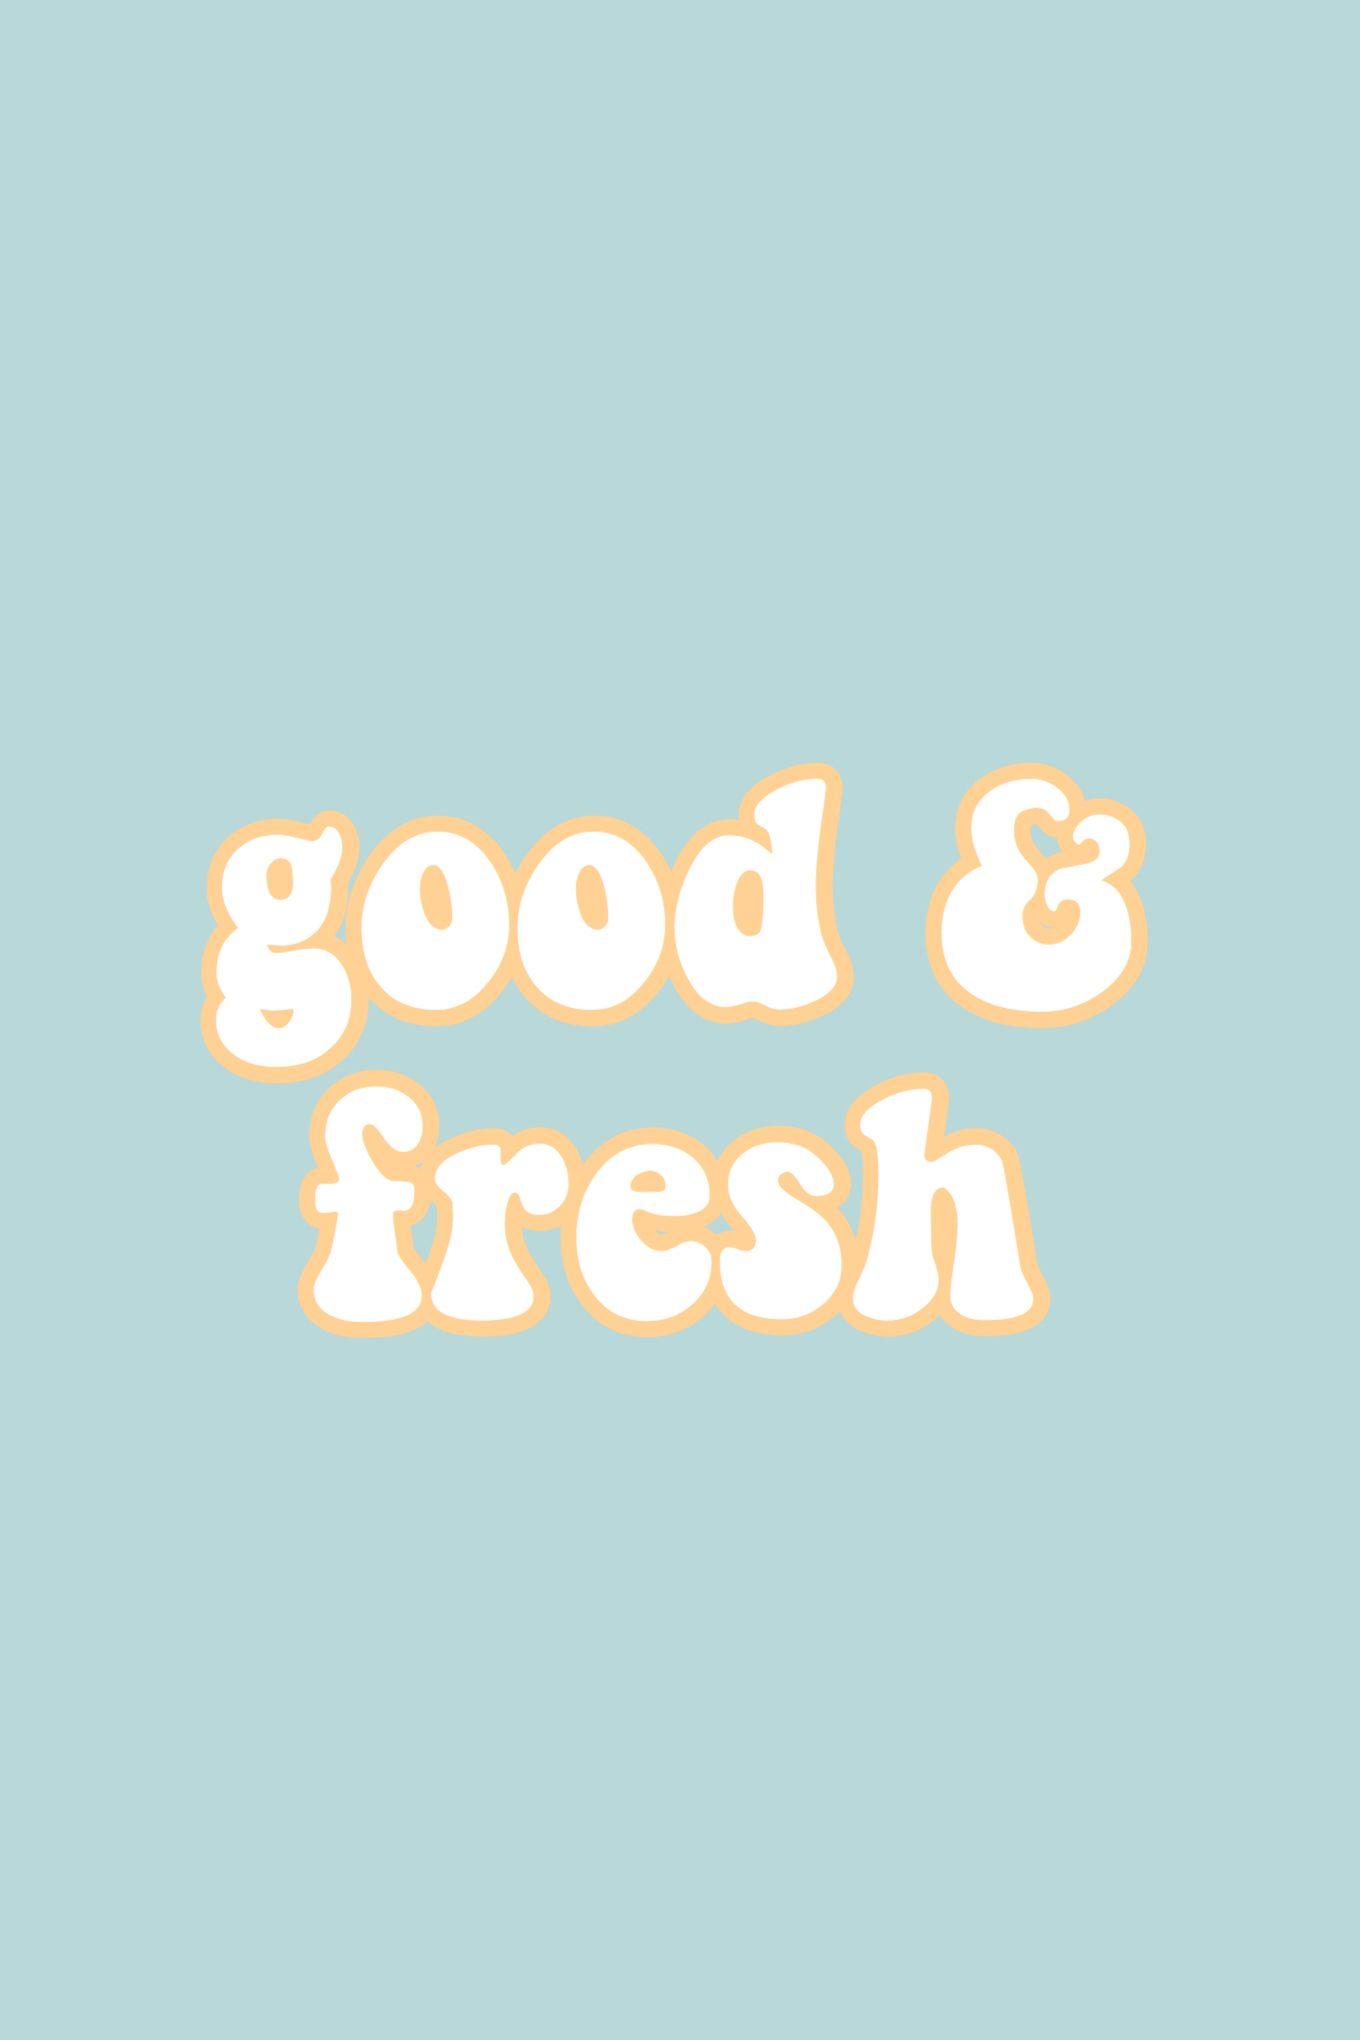 good and fresh quote words teal yellow aesthetic iphone wallpaper